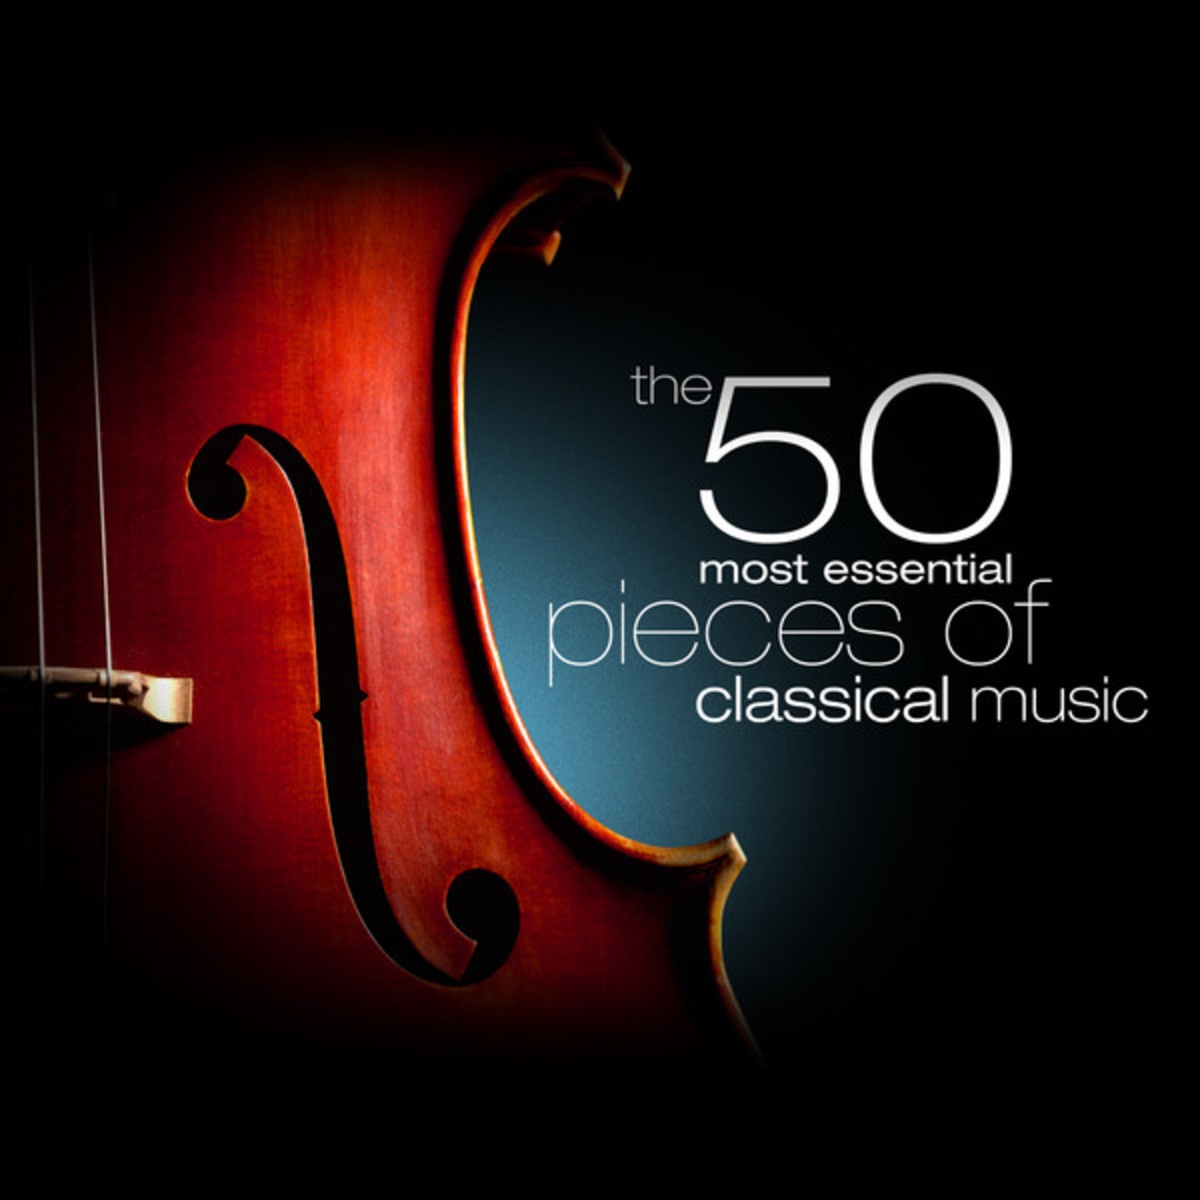 The 50 Most Essential Pieces of Classical Music